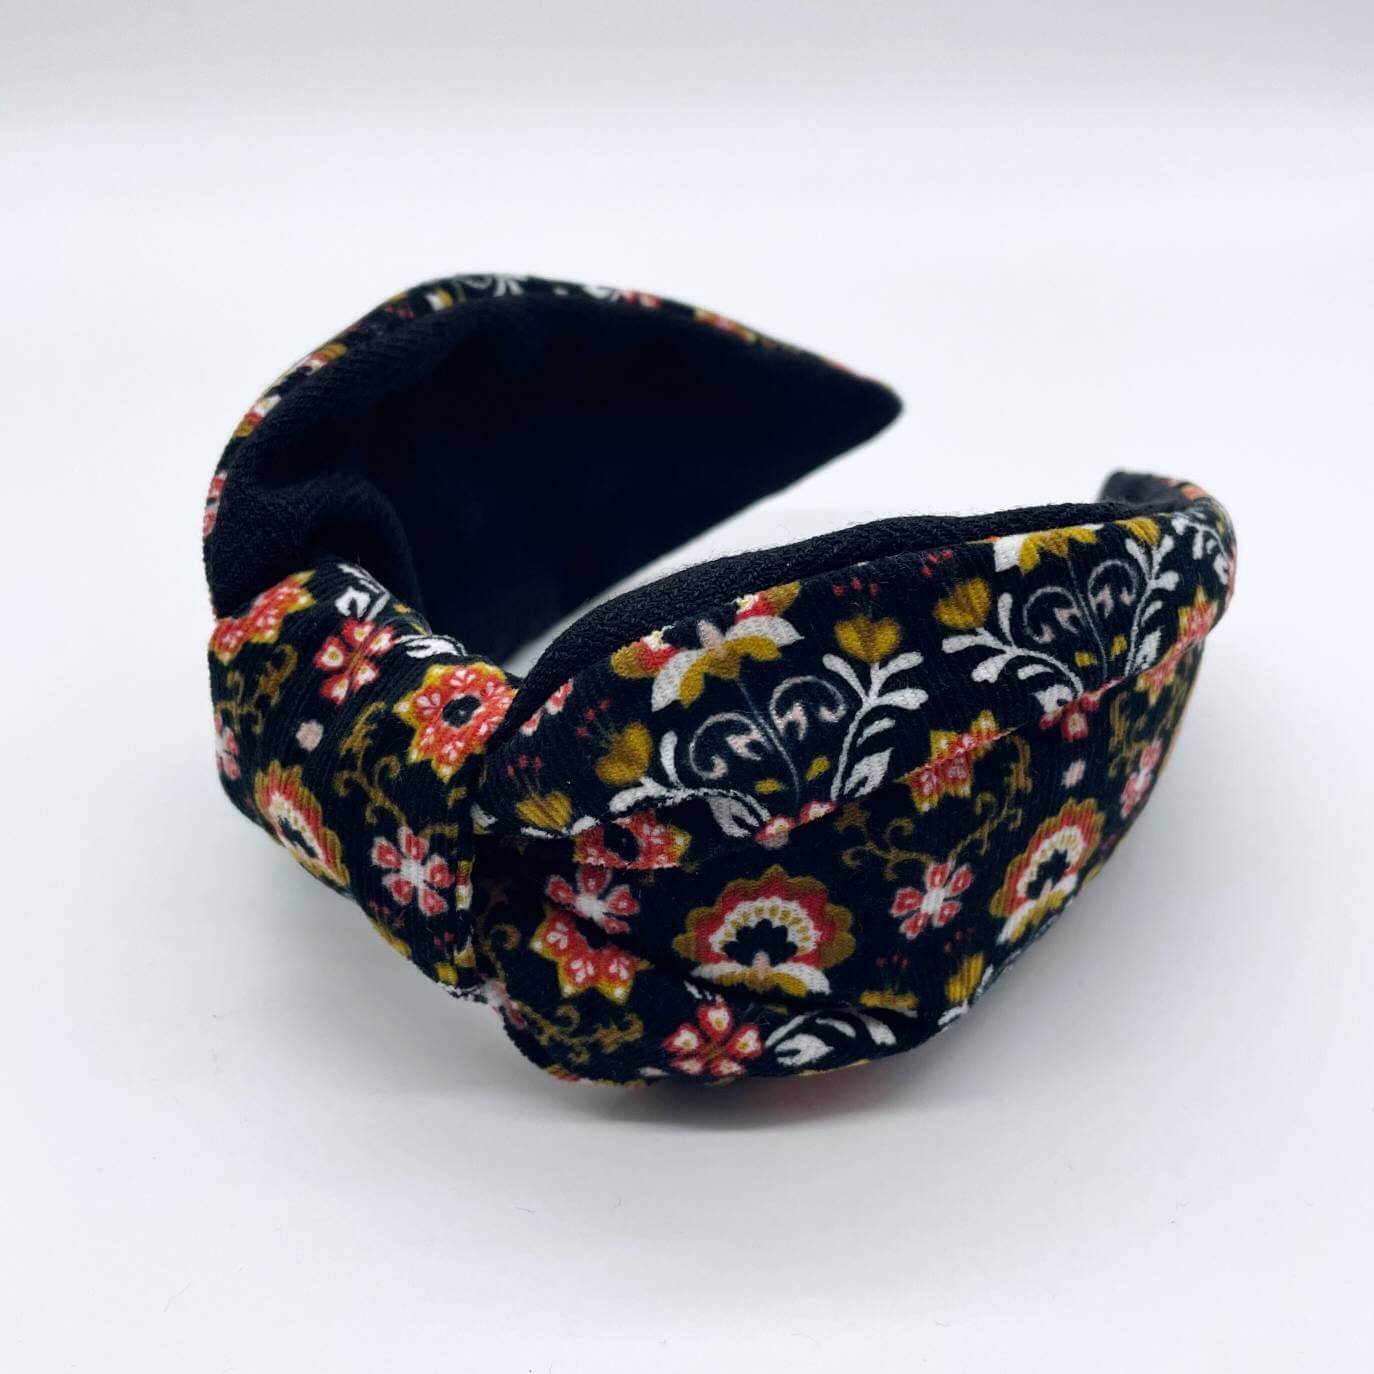 A bow-style, Scandinavian black floral-print corduroy headband with a soft, black lining underneath.